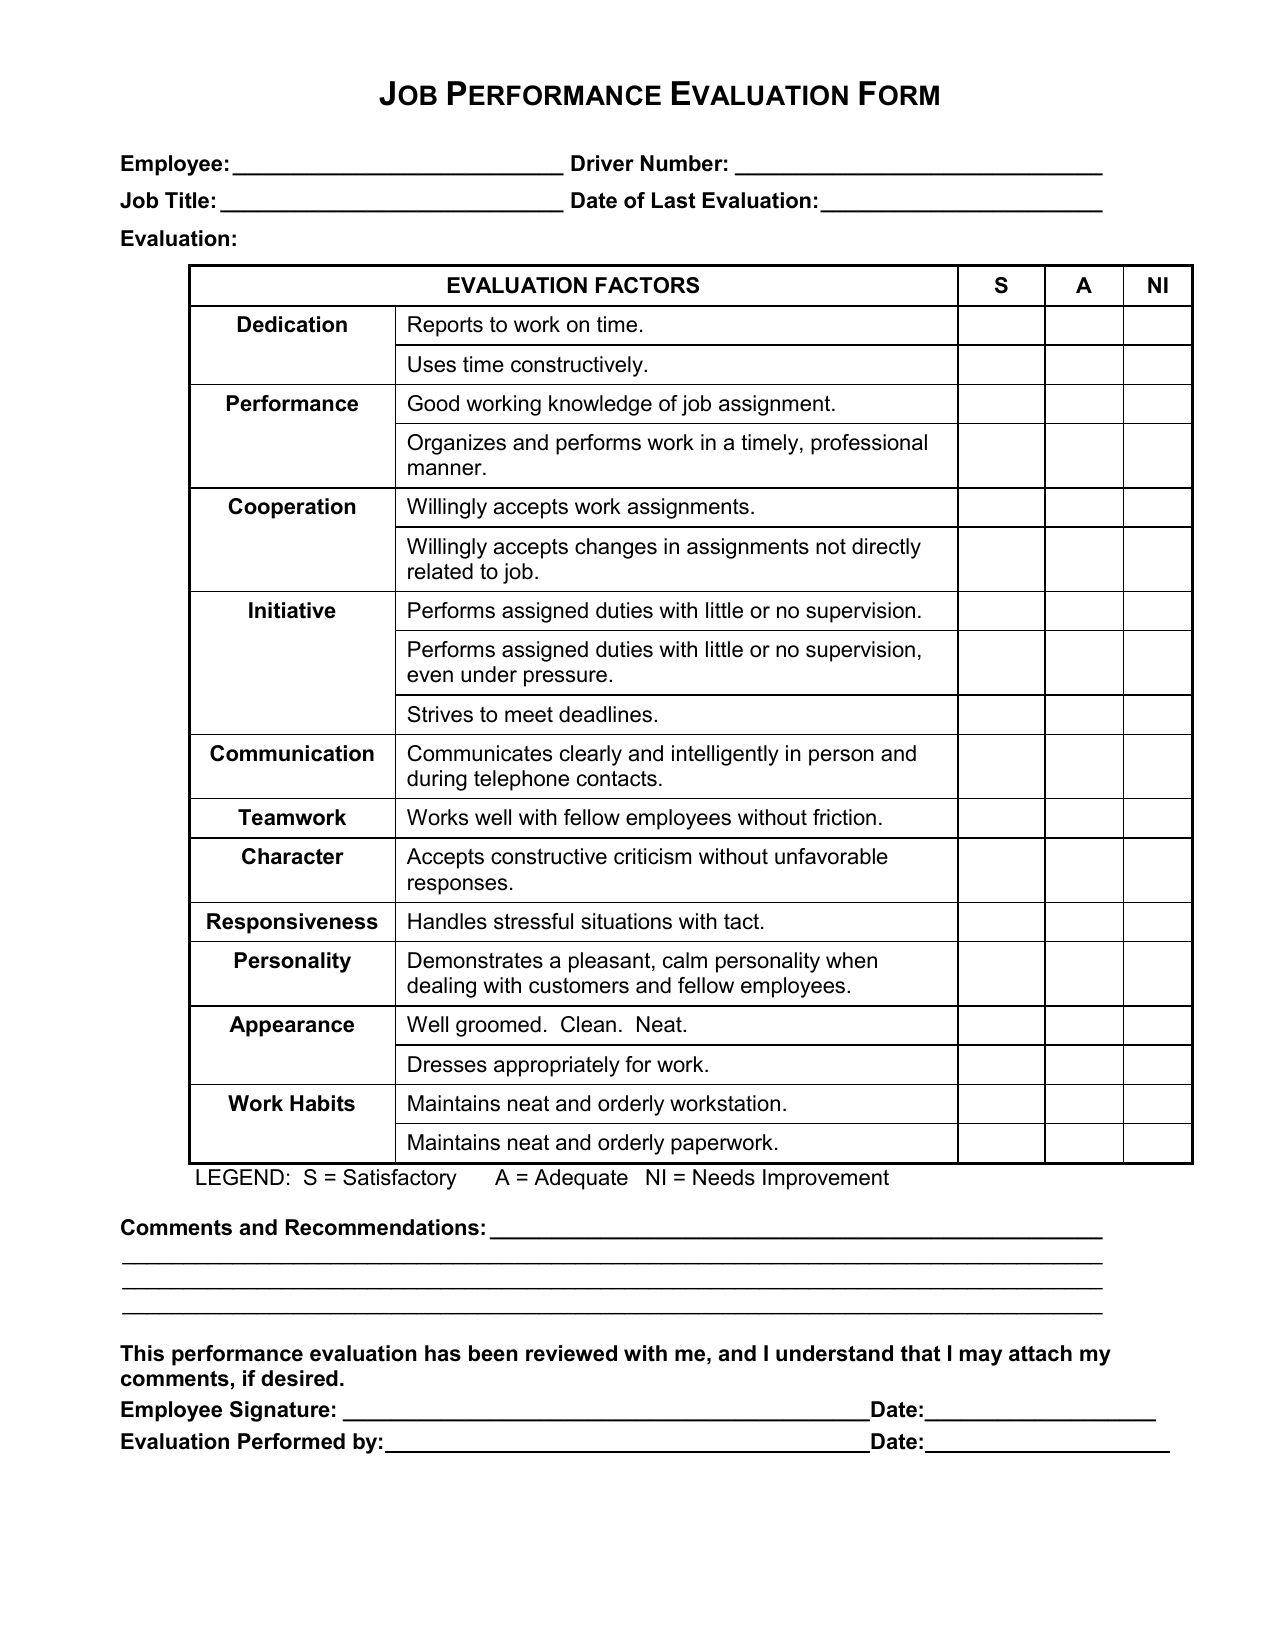 Employee Performance Evaluation Form Tips